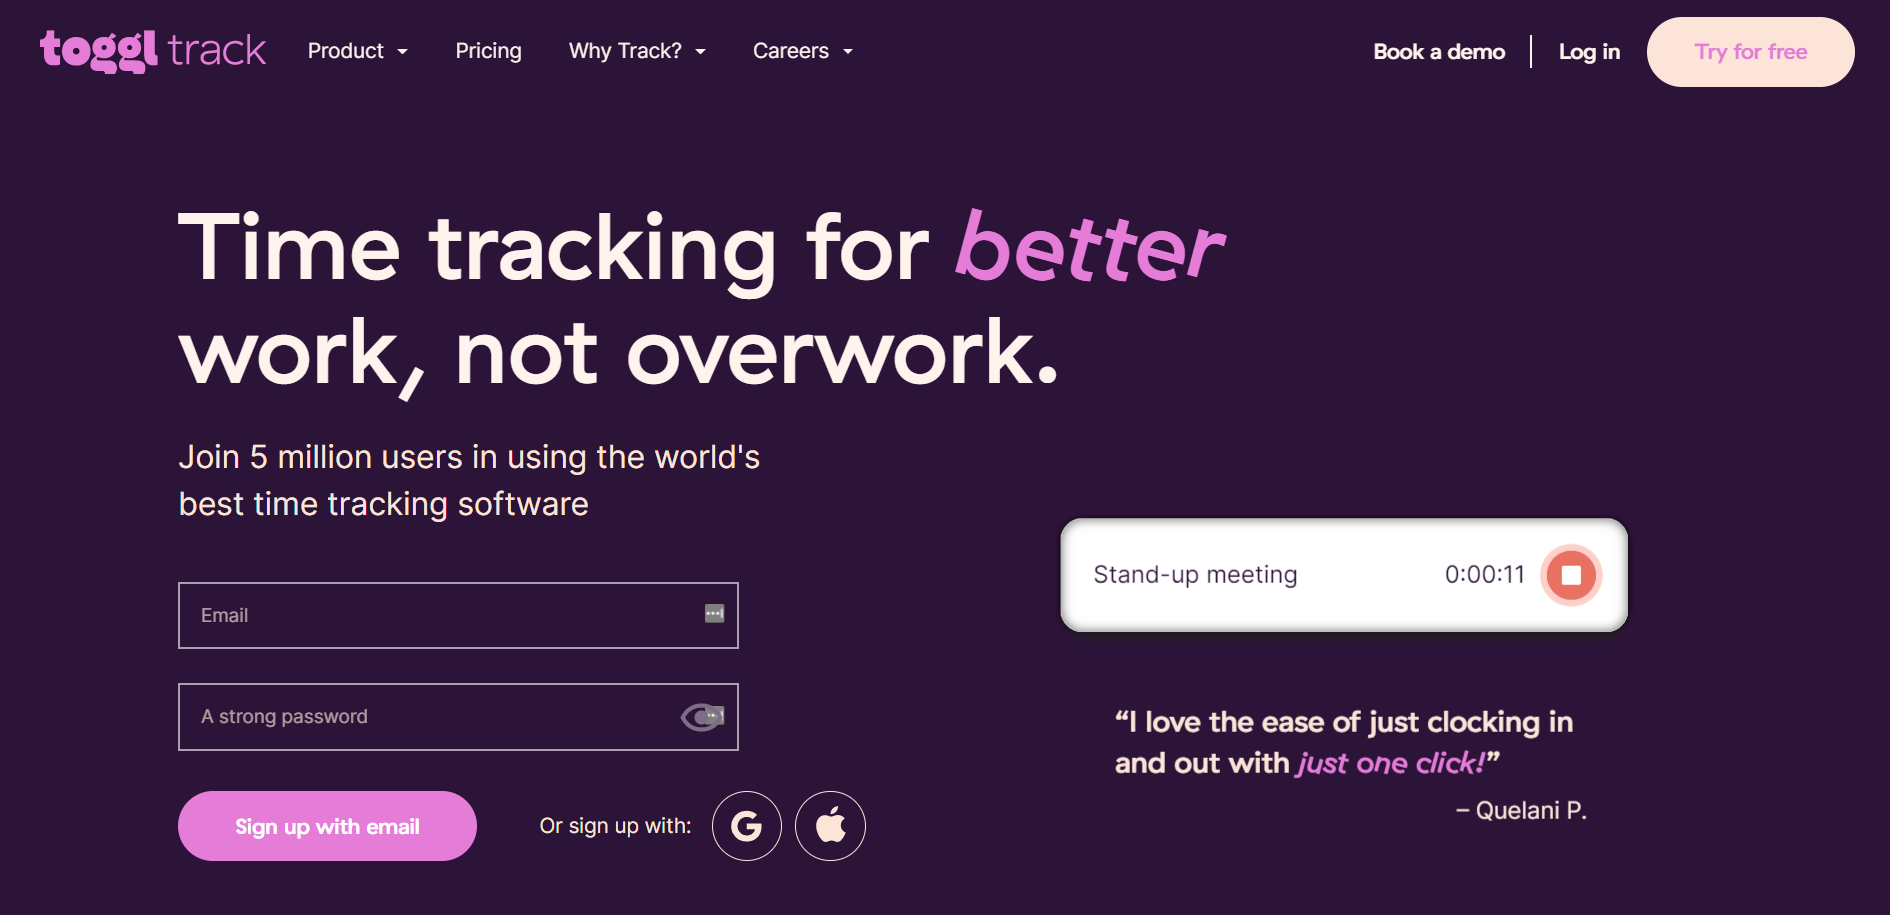 Toggl Track Time Tracking Software for Any Workflow